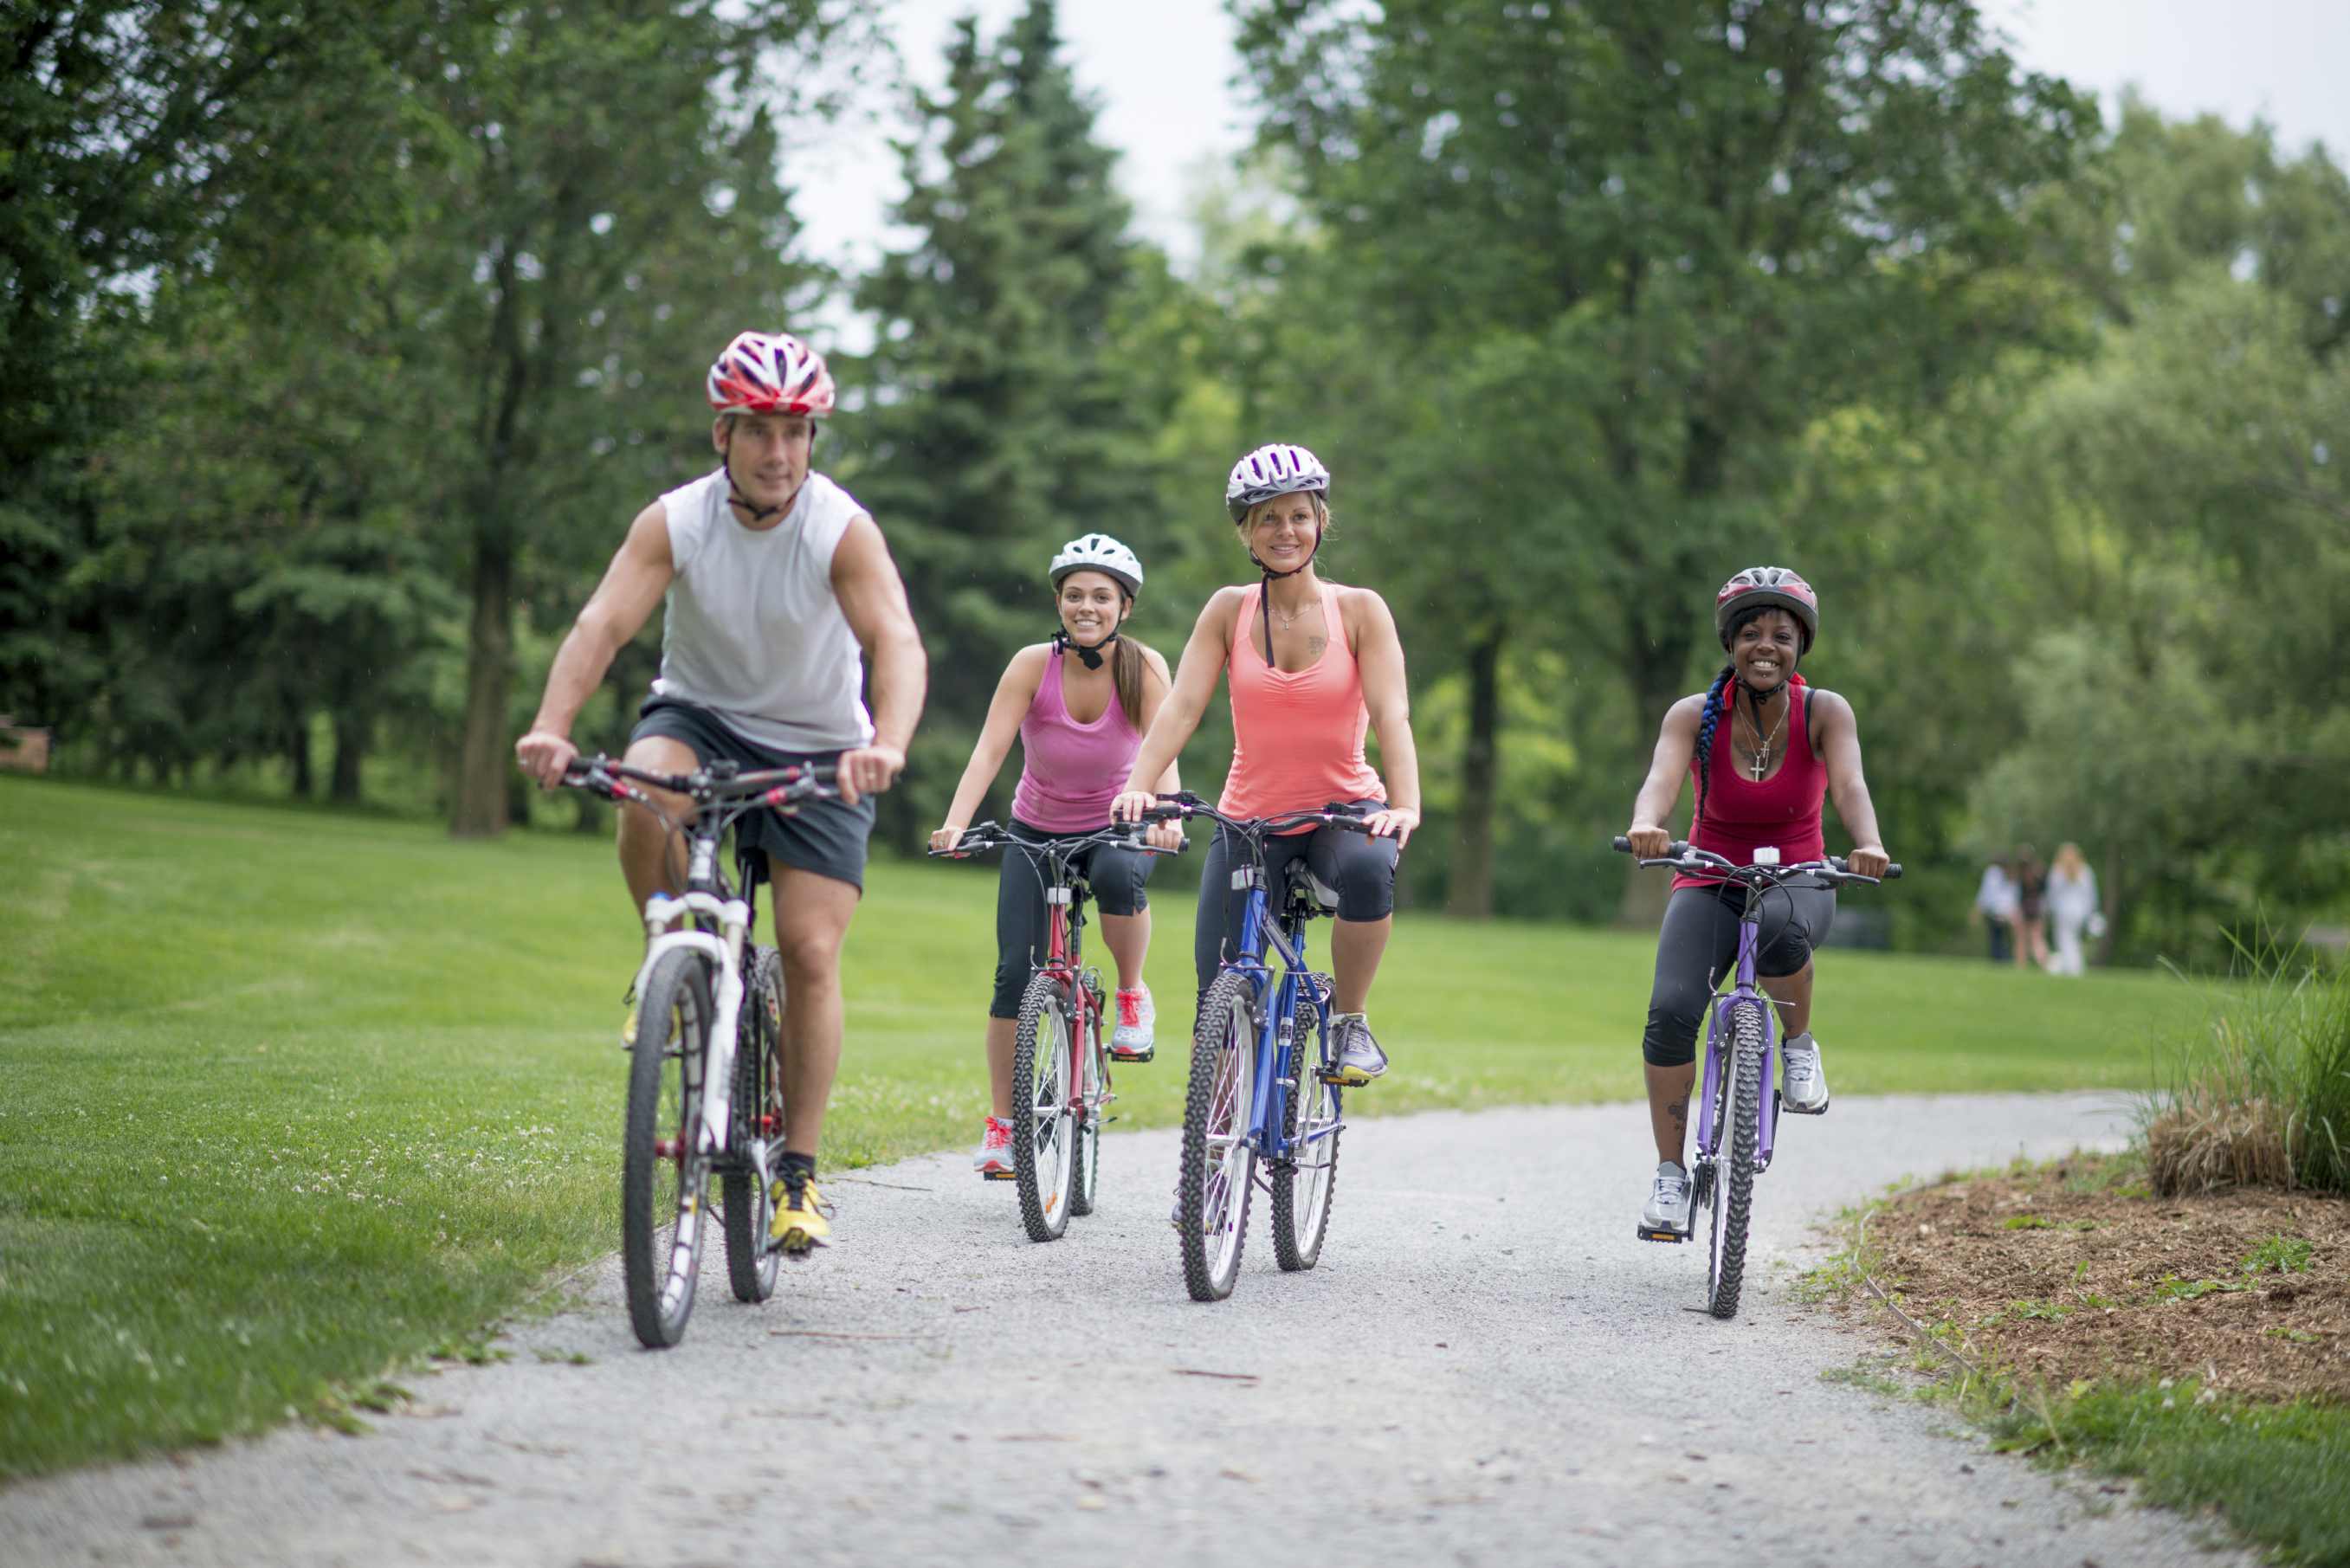 Four smiling people wearing helmets as they bicycle on a path through a park.